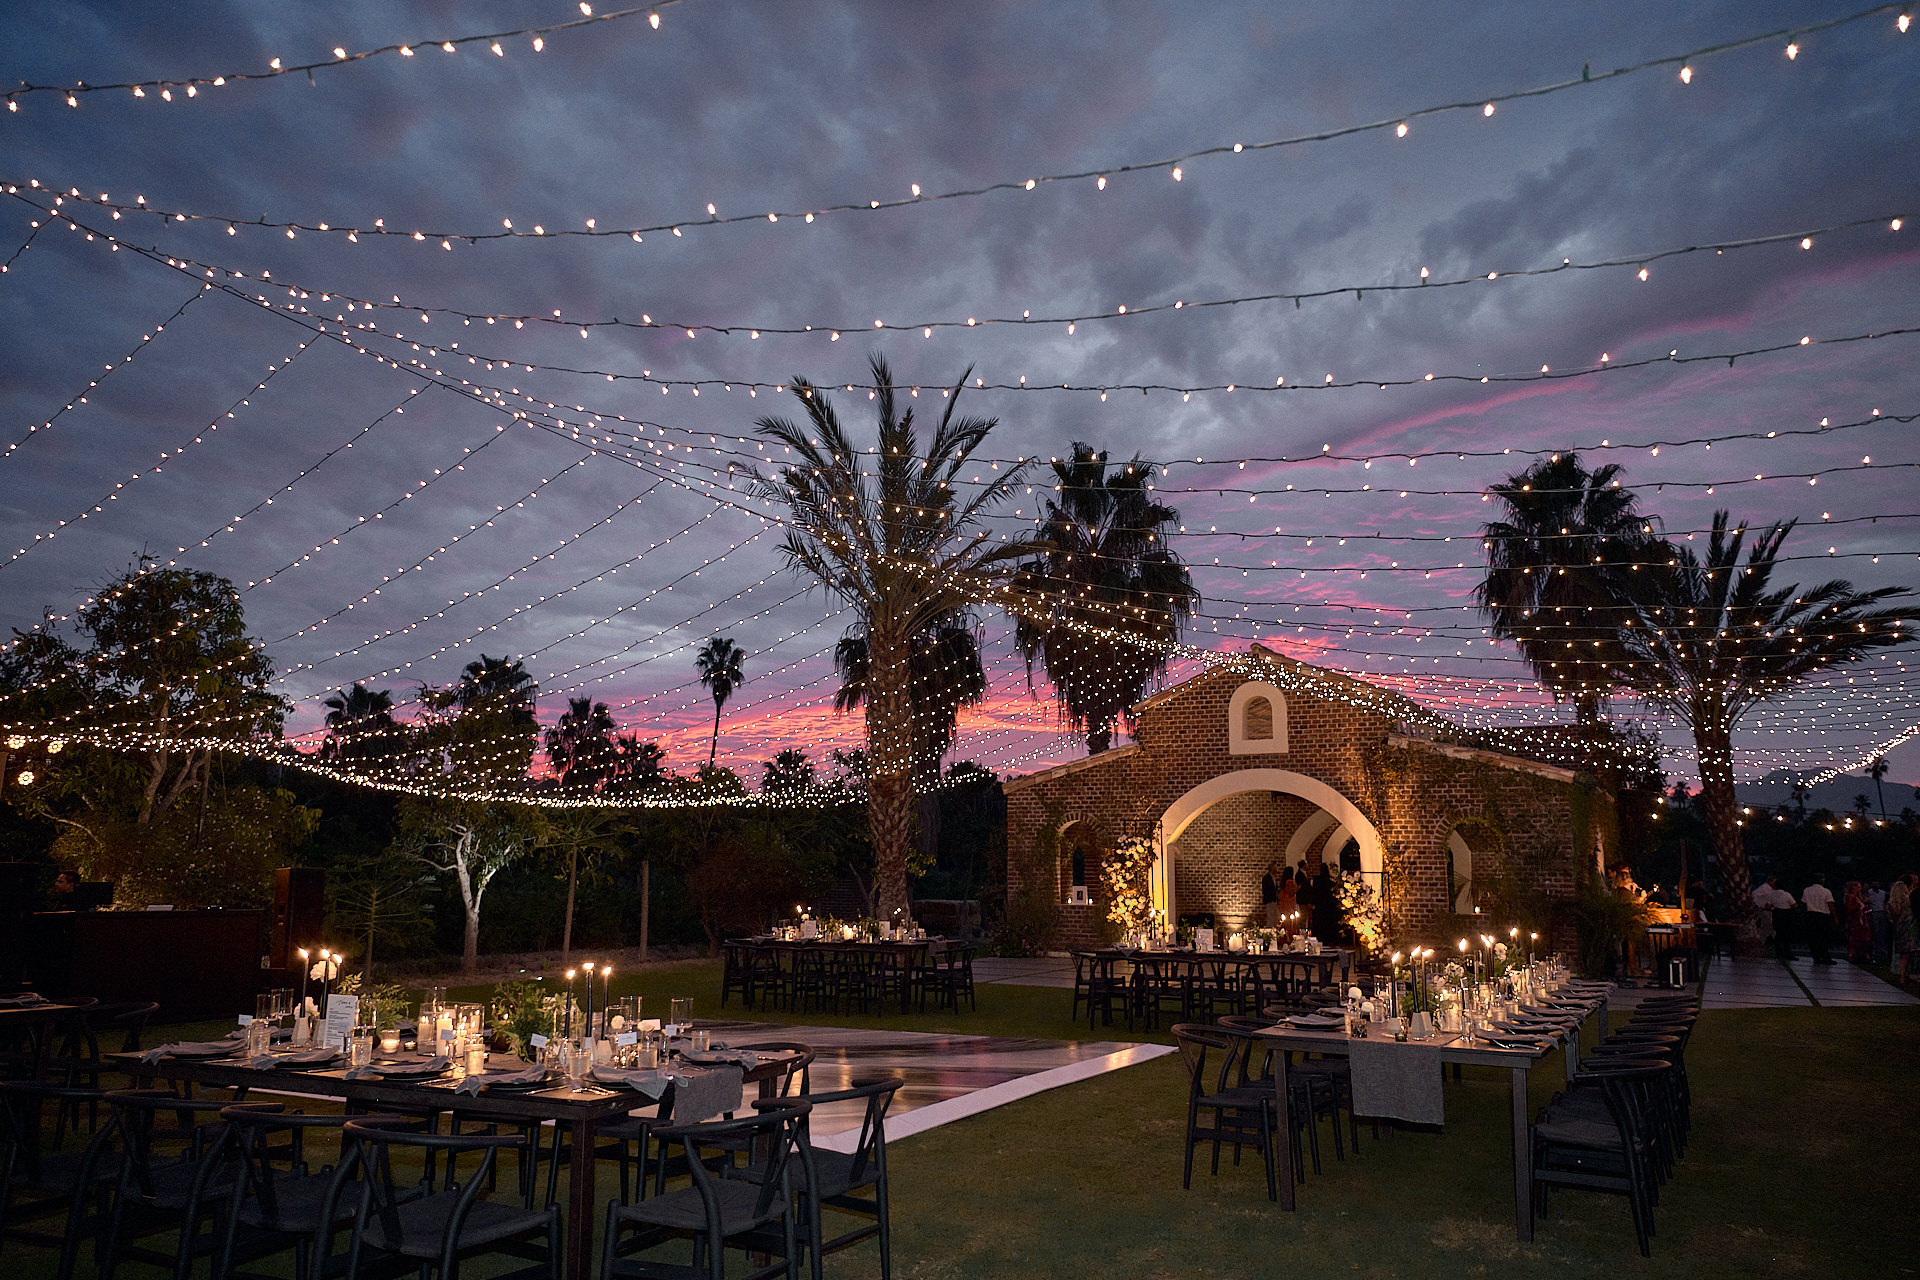 An outdoor wedding reception with string lights and palm trees.